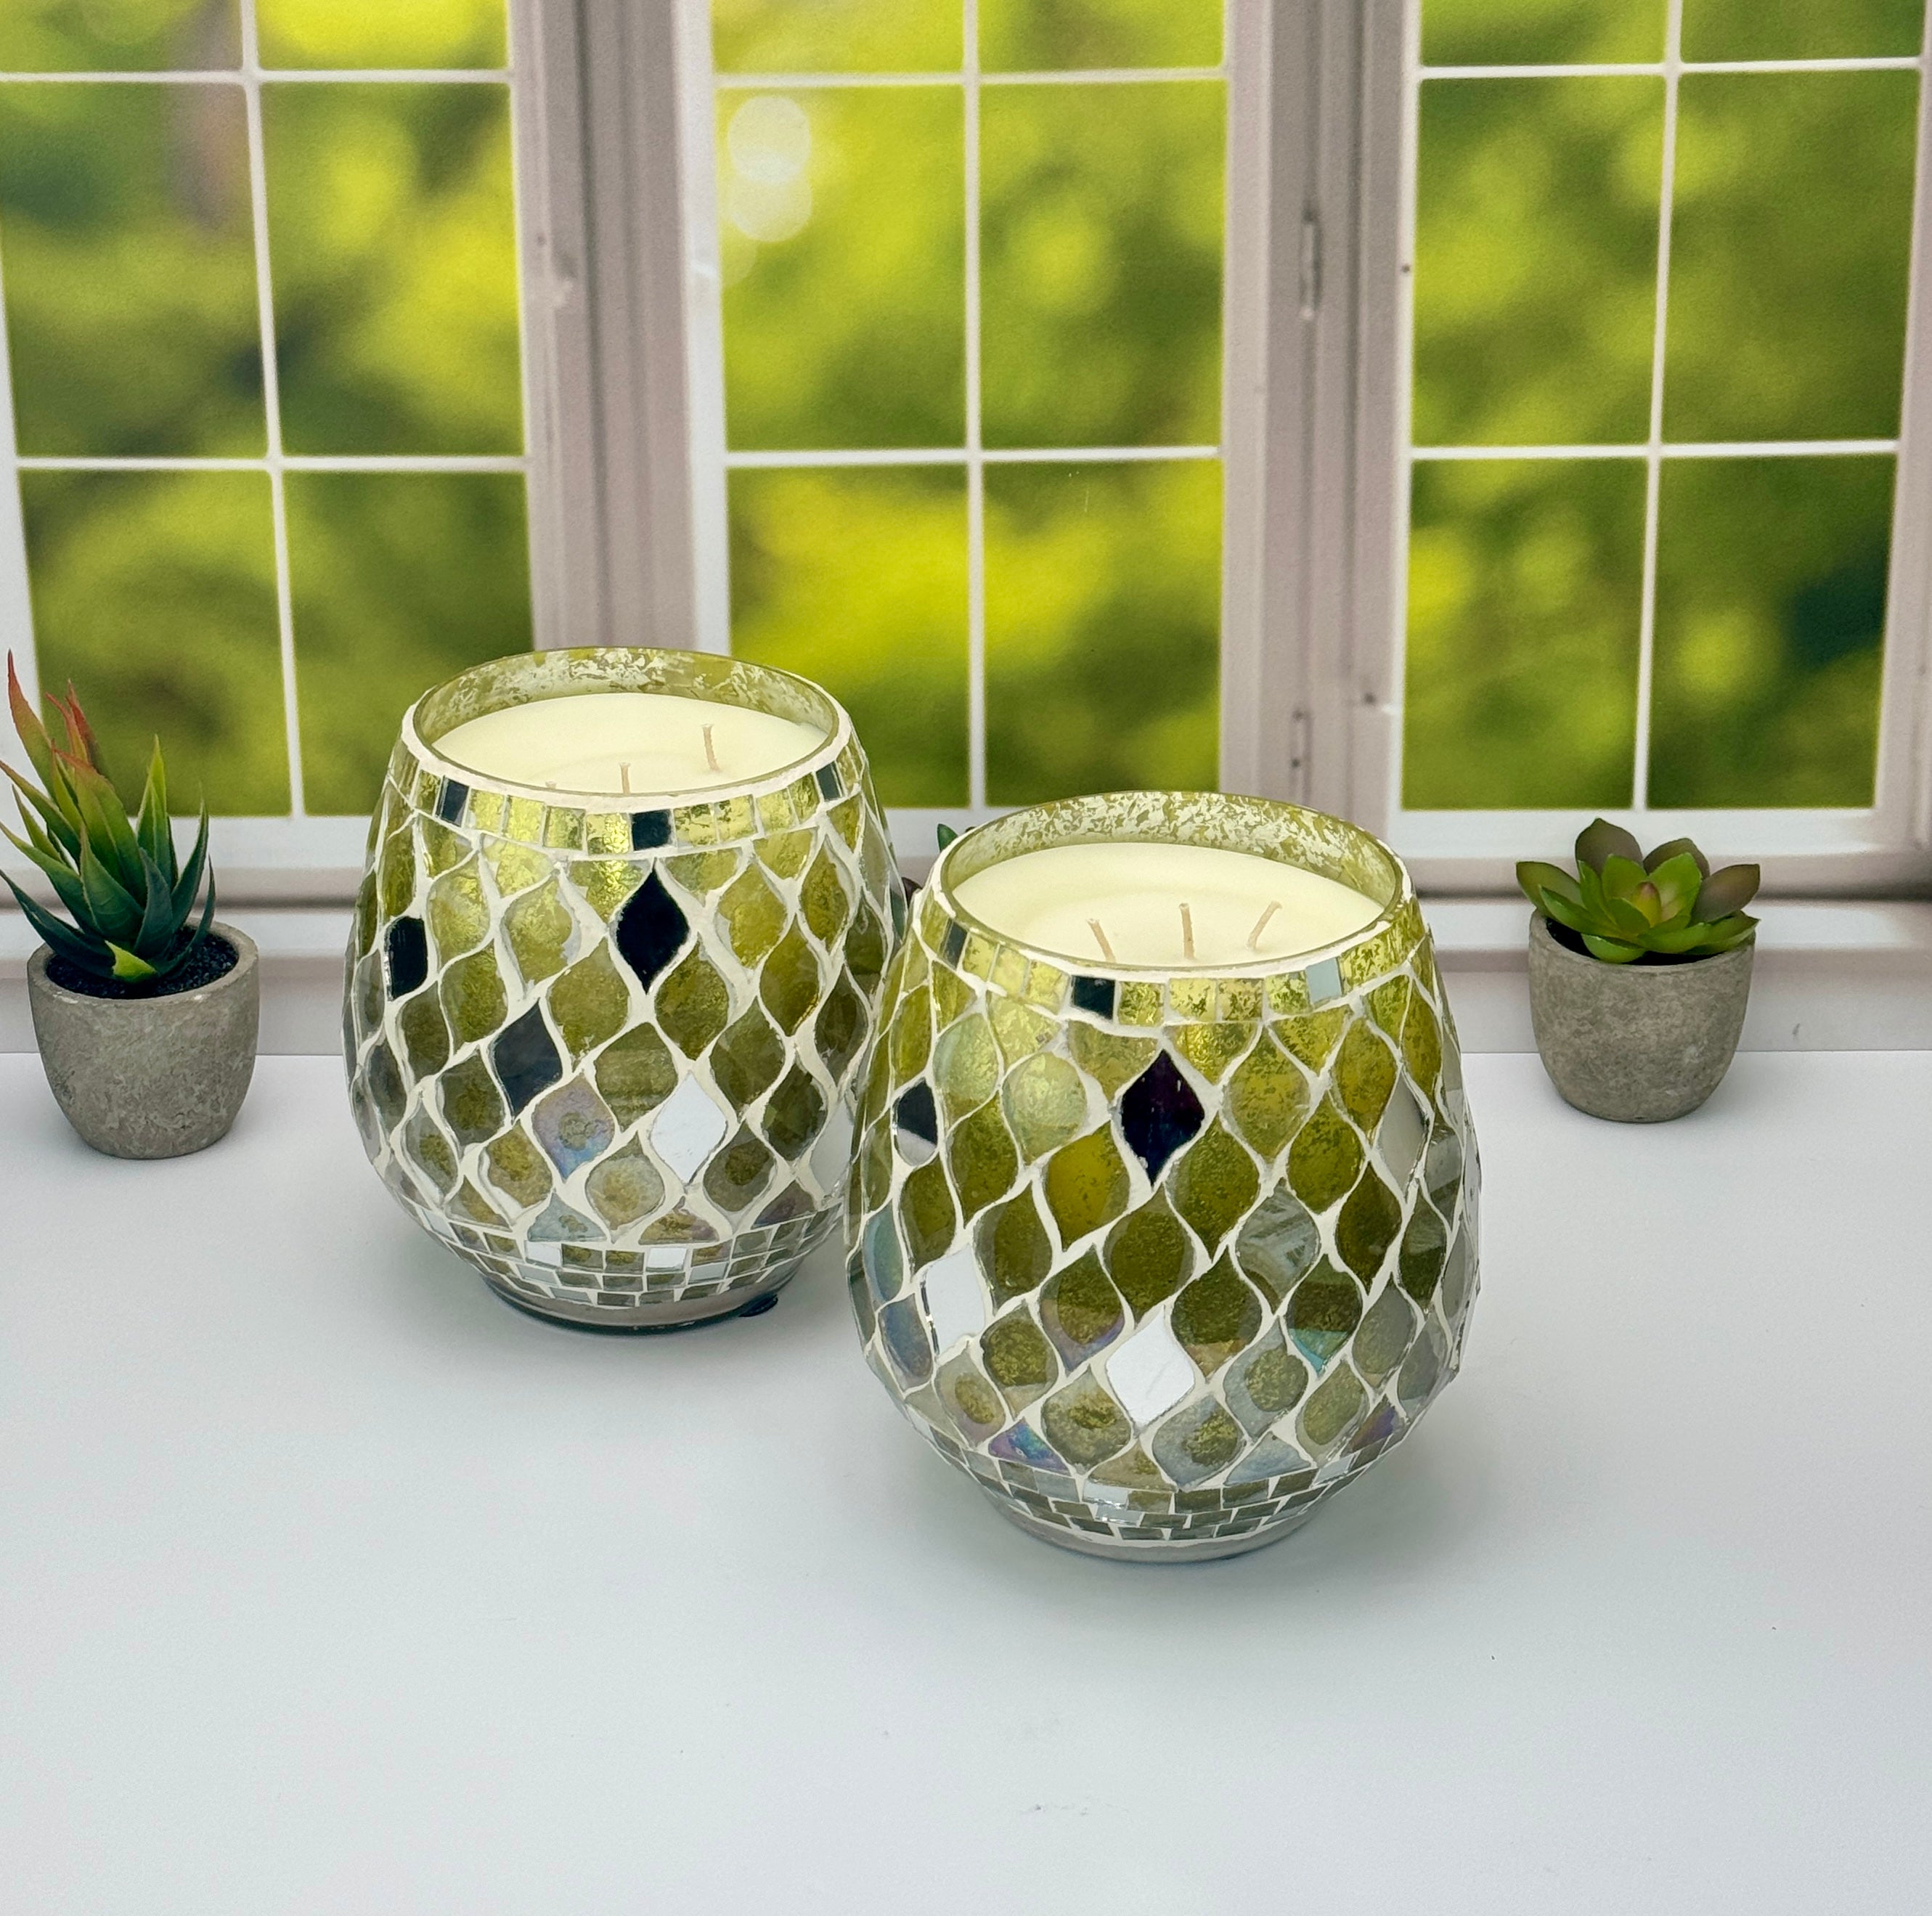 Emerald Glow: Three Wick Wax Candles with Mosaic Design